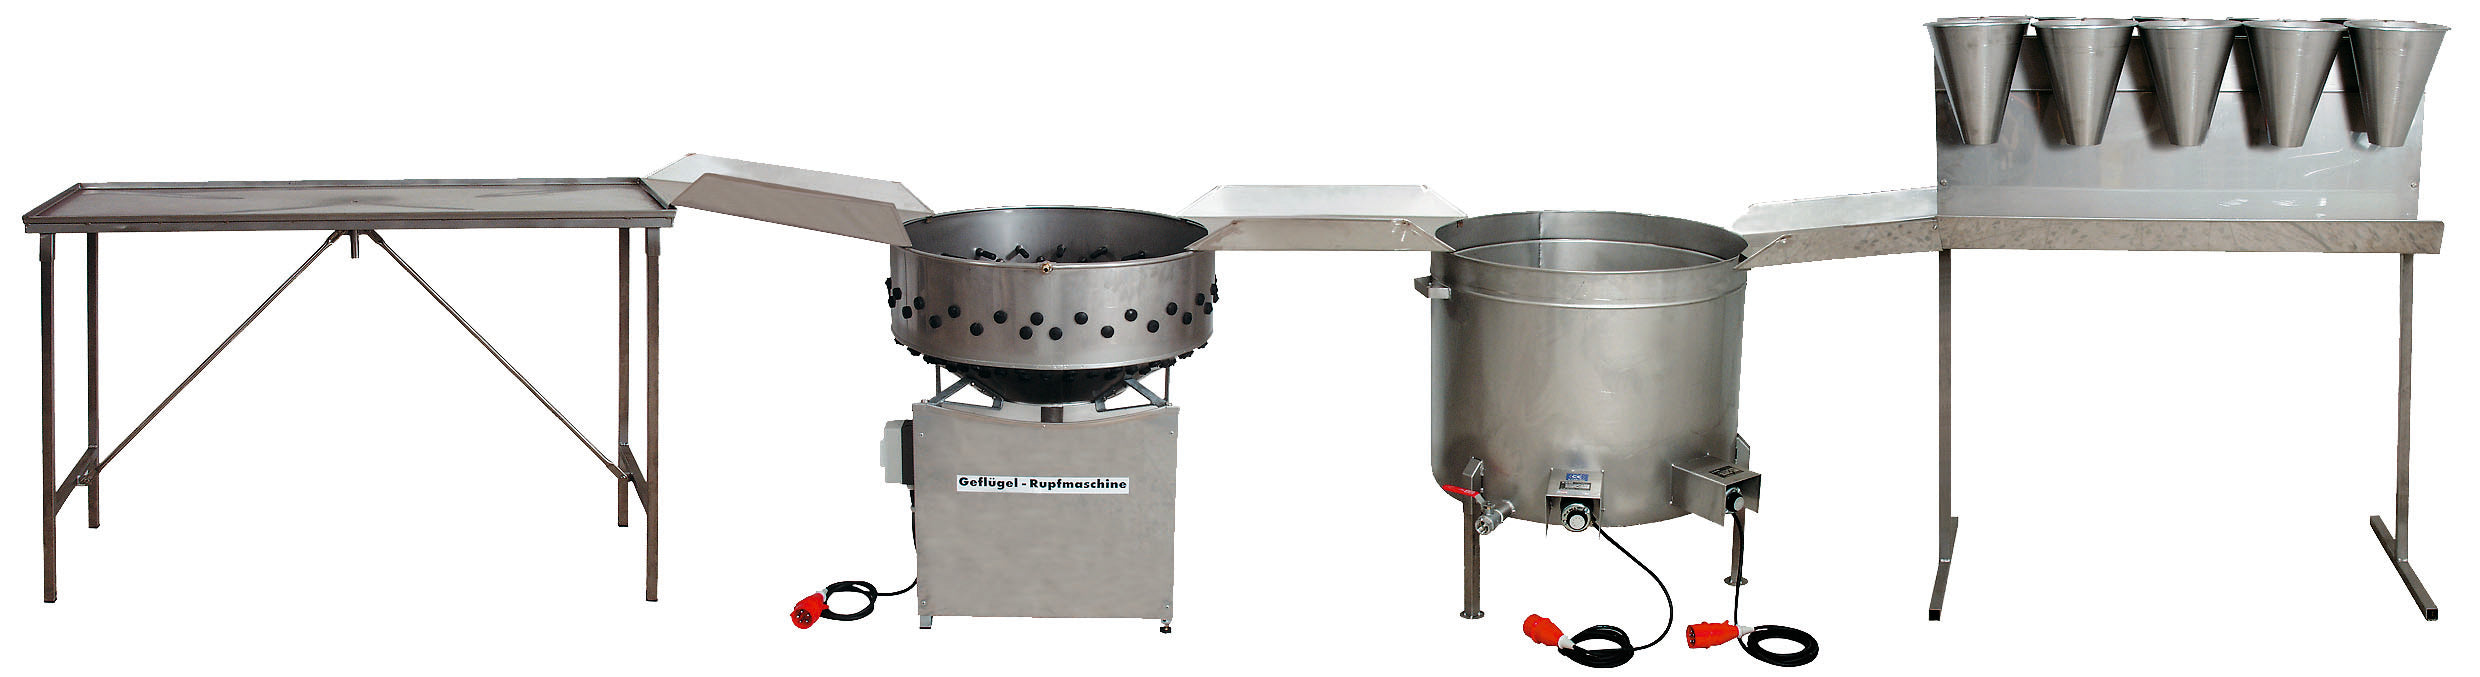 Poultry-Processing-Line - Slaughter Arrangement for Poultry - made of stainless steel